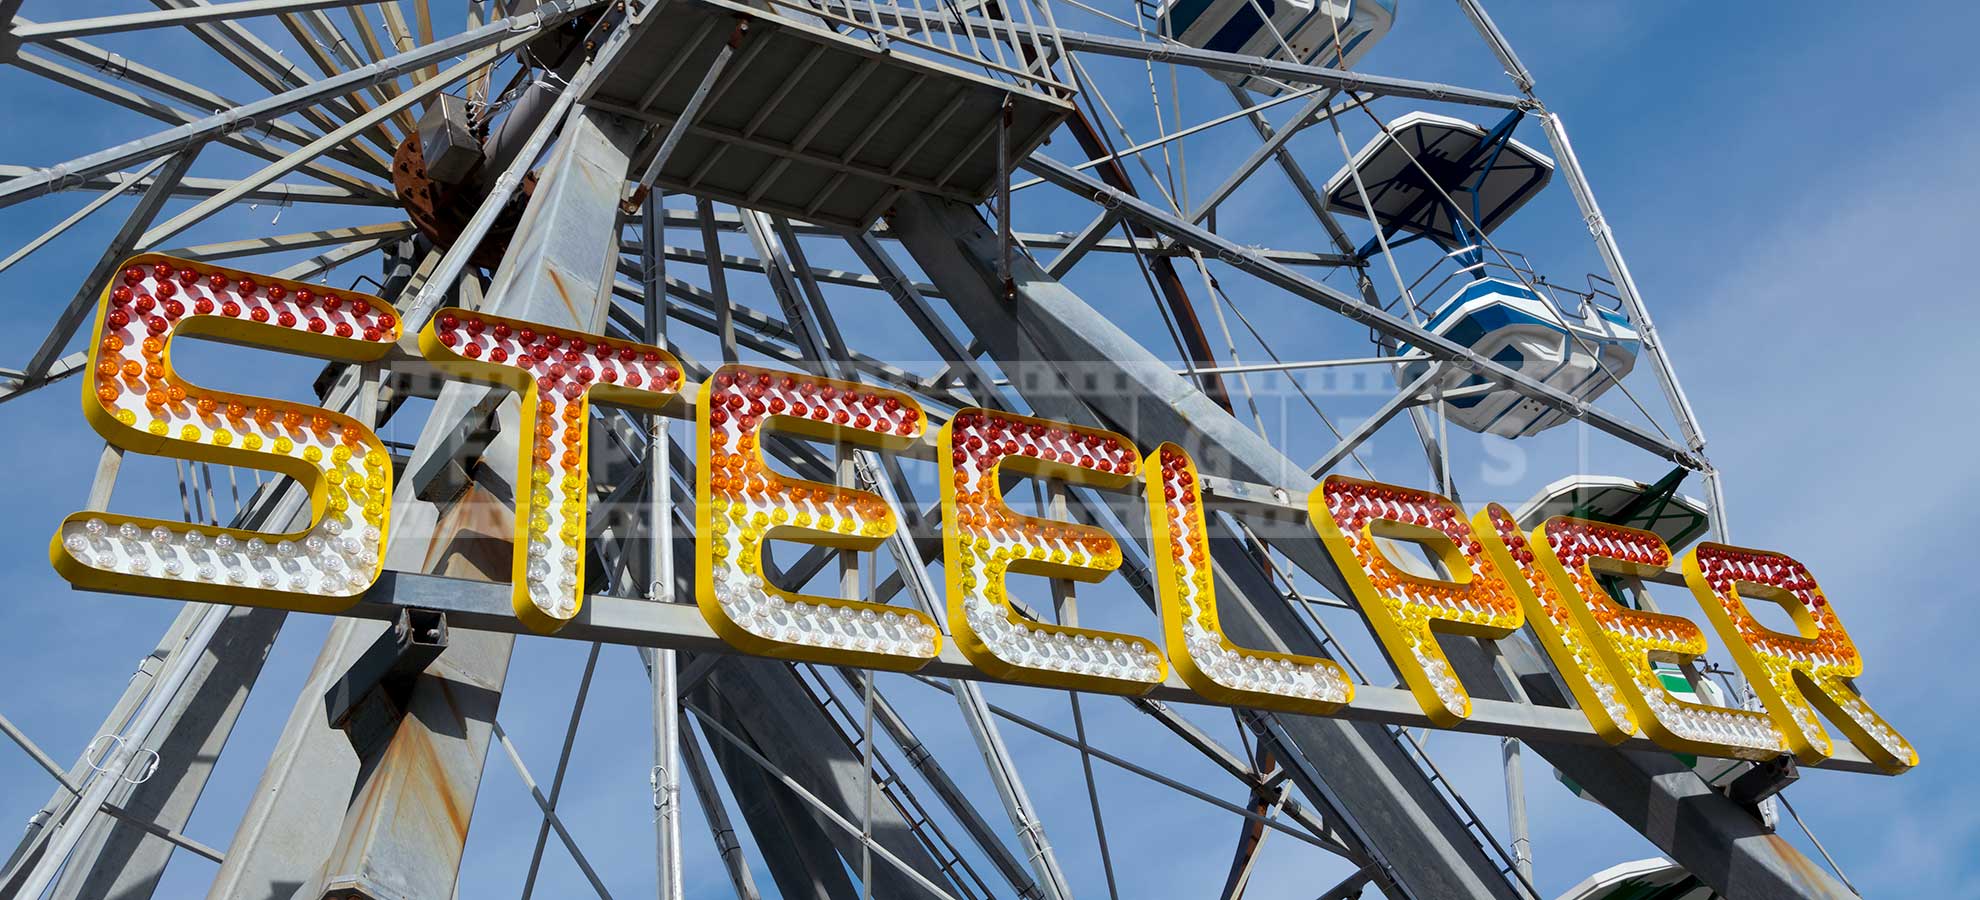 steel pier retro sign at the observation ferris wheel